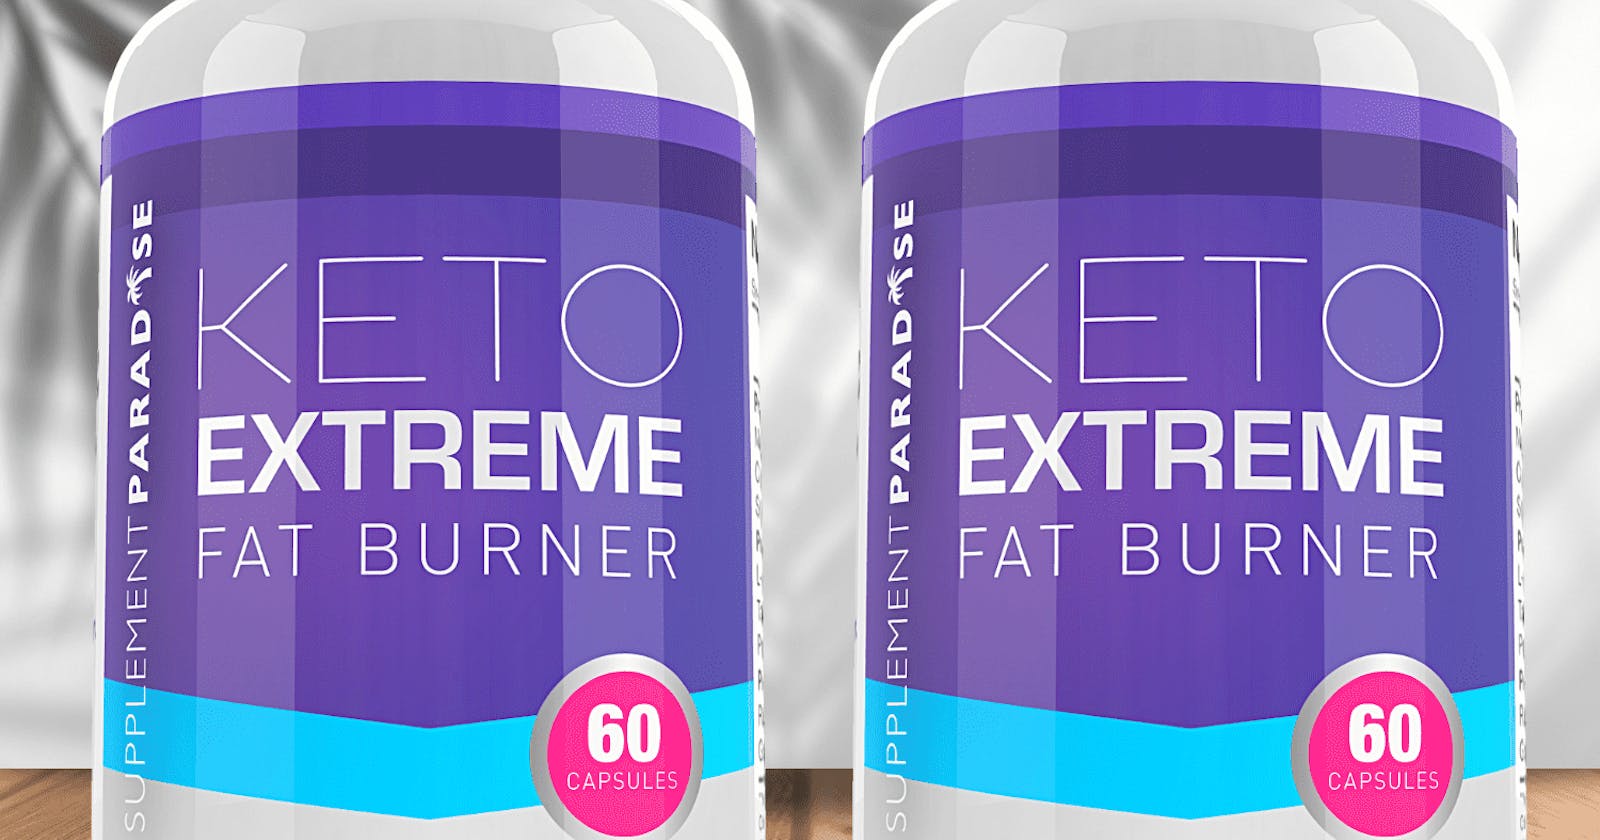 Exposed: The Truth About Keto Extreme Fat Burner - Scam Alert